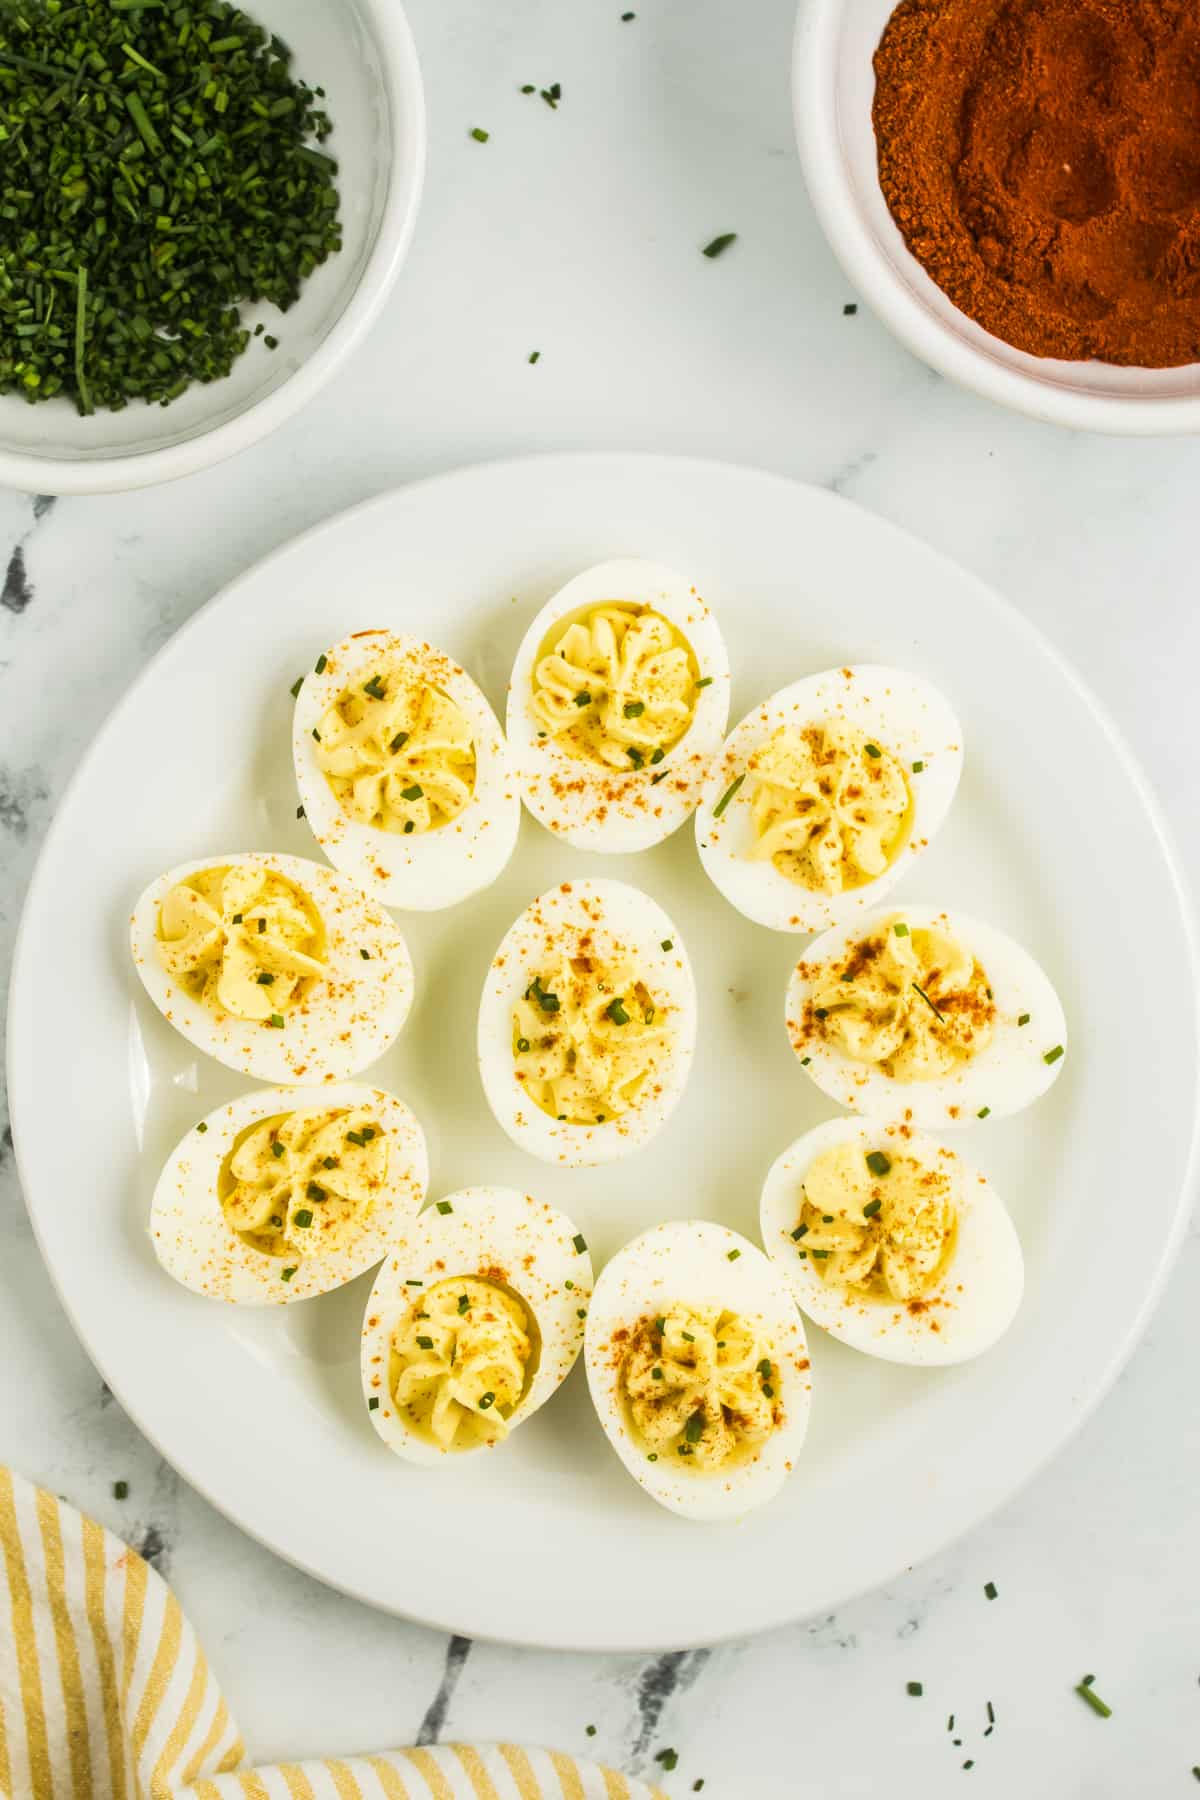 The image features a plate of Deviled Eggs with Apple Cider Vinegar. The deviled eggs are arranged neatly, showcasing their appetizing appearance. On the side, there is a small bowl of paprika, adding a touch of color and flavor to the dish. Additionally, chopped chives are placed nearby, providing a fresh and aromatic garnish option.